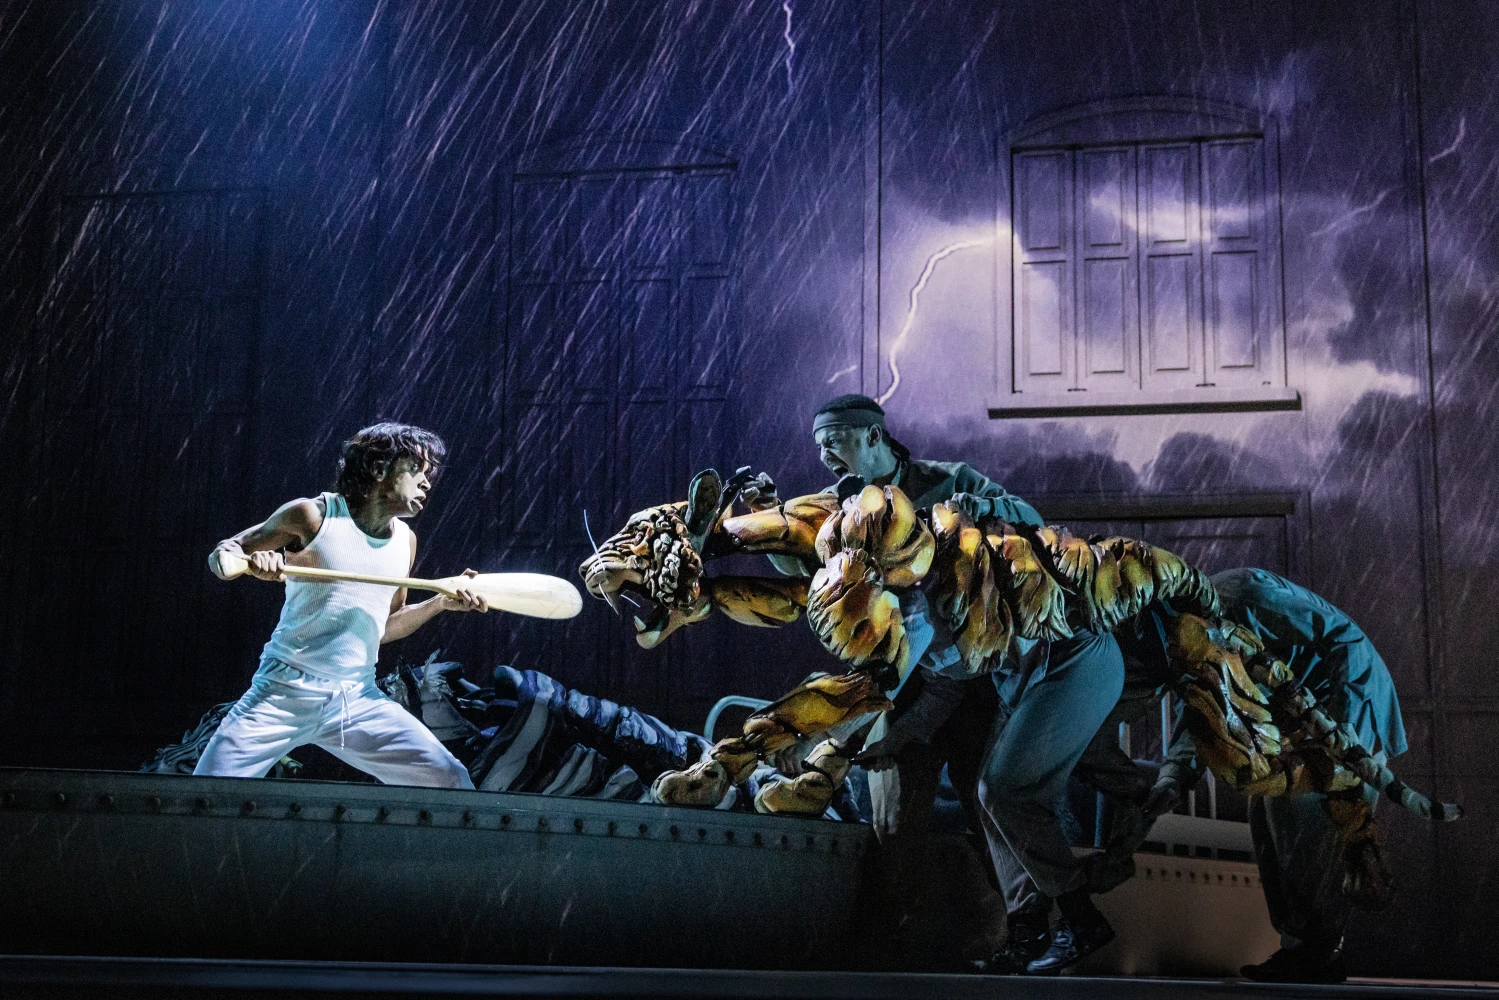 Life of Pi on Broadway: What to expect - 2